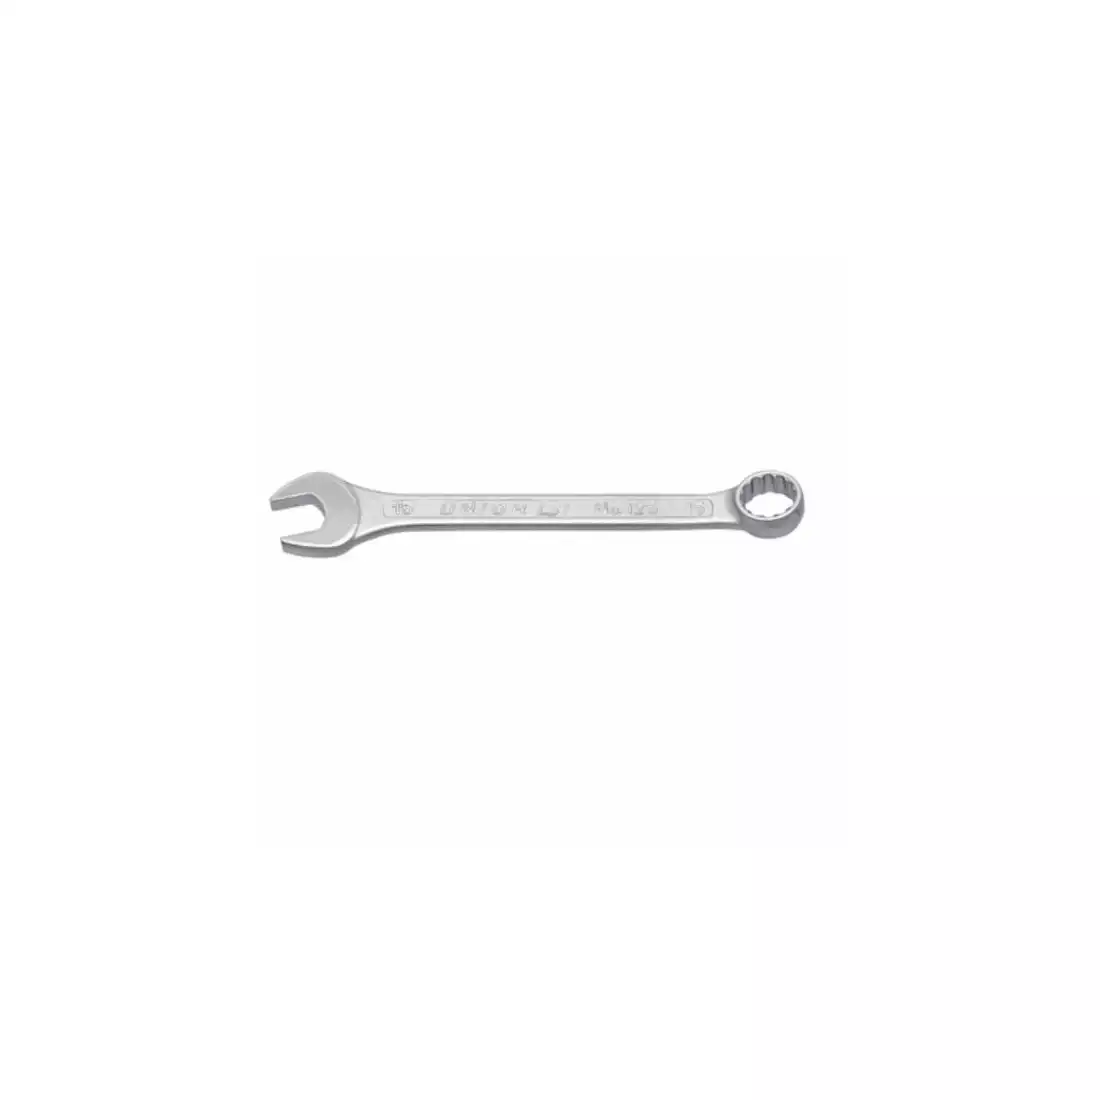 UNIOR combination wrench, short type 19 mm